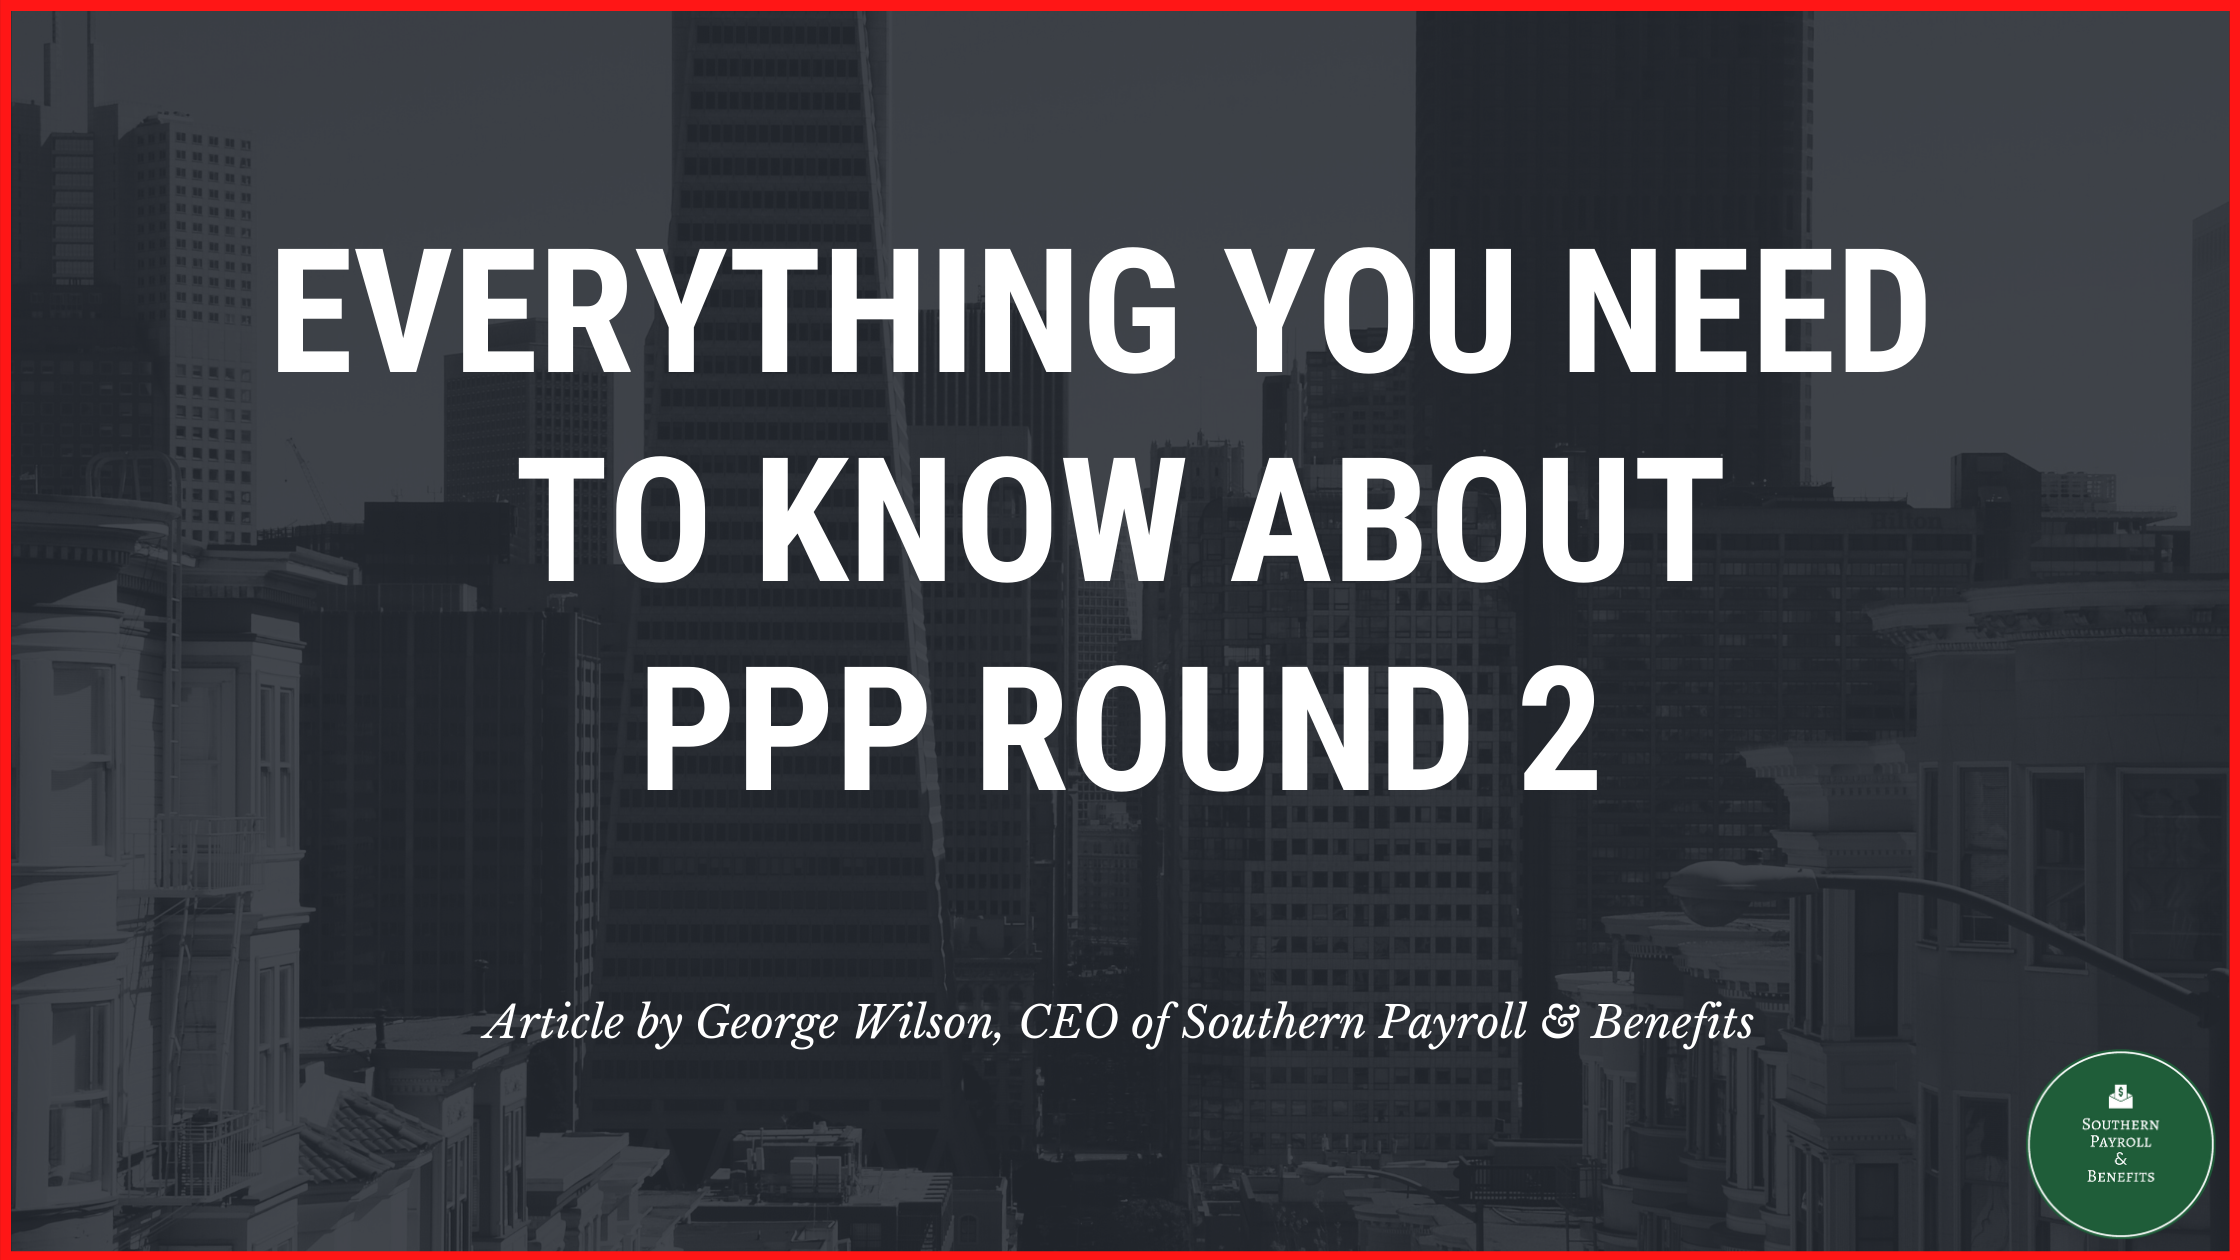 Everything You Need to Know About PPP Round 2